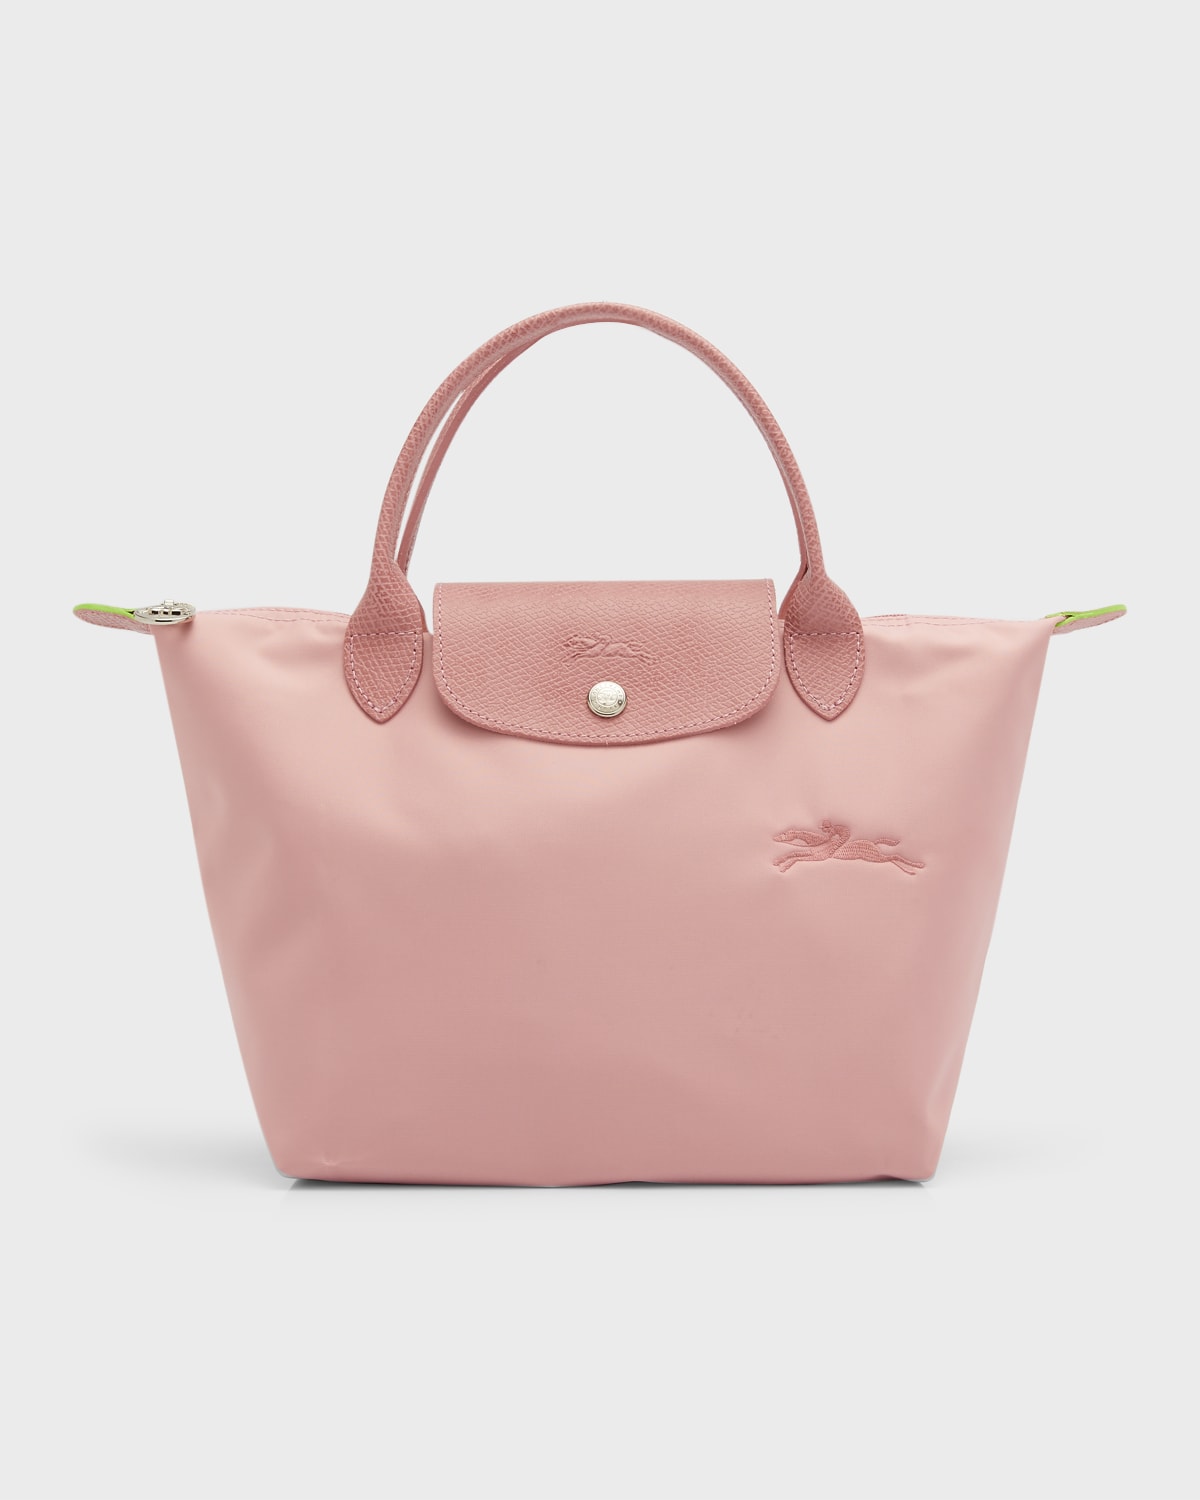 Le Pliage Green Pouch with handle Petal Pink - Recycled canvas